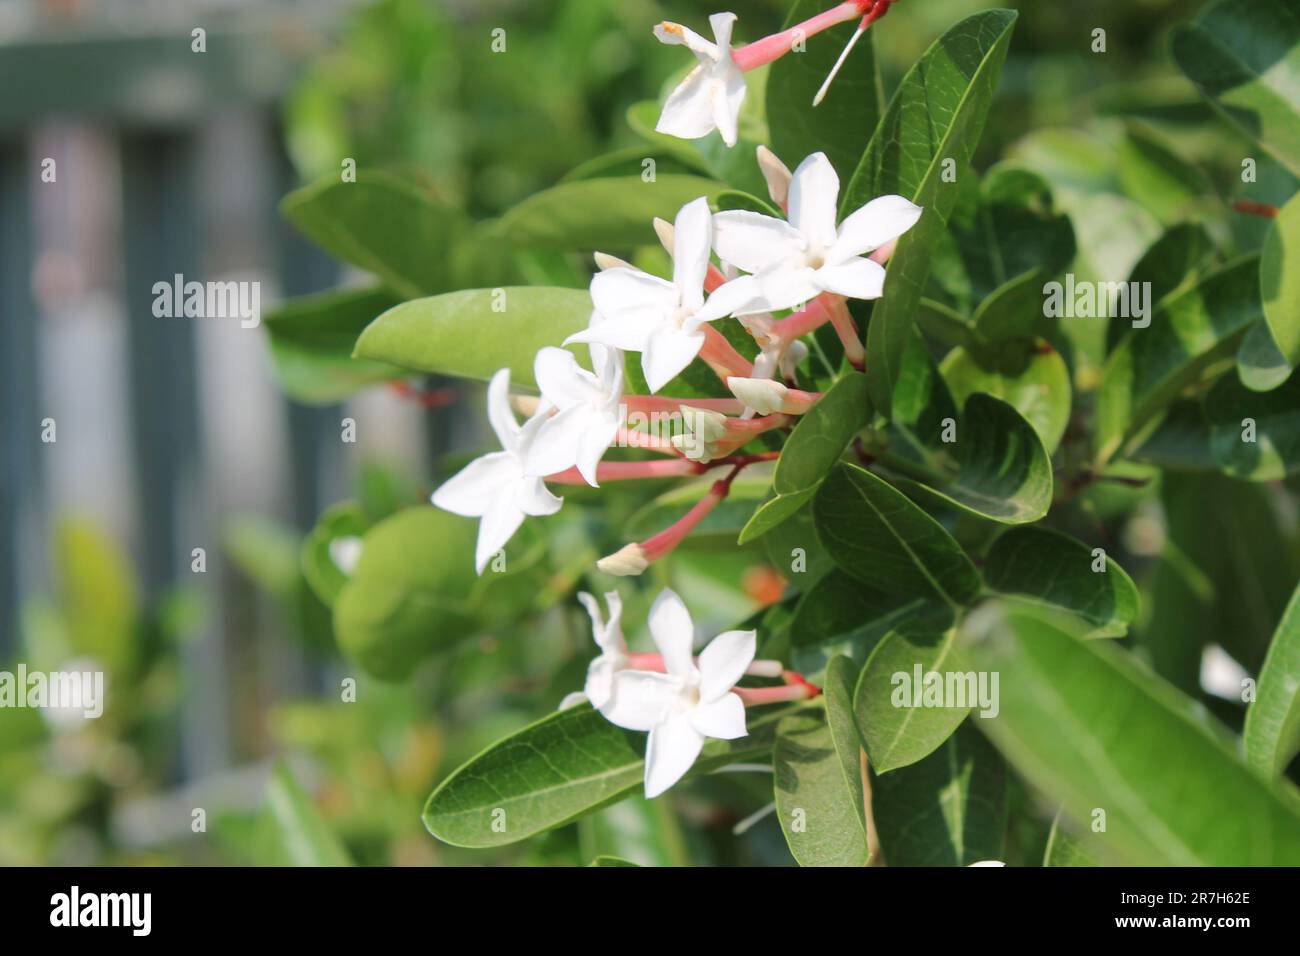 Yawning mangos are blooming in the middle of the day. Stock Photo